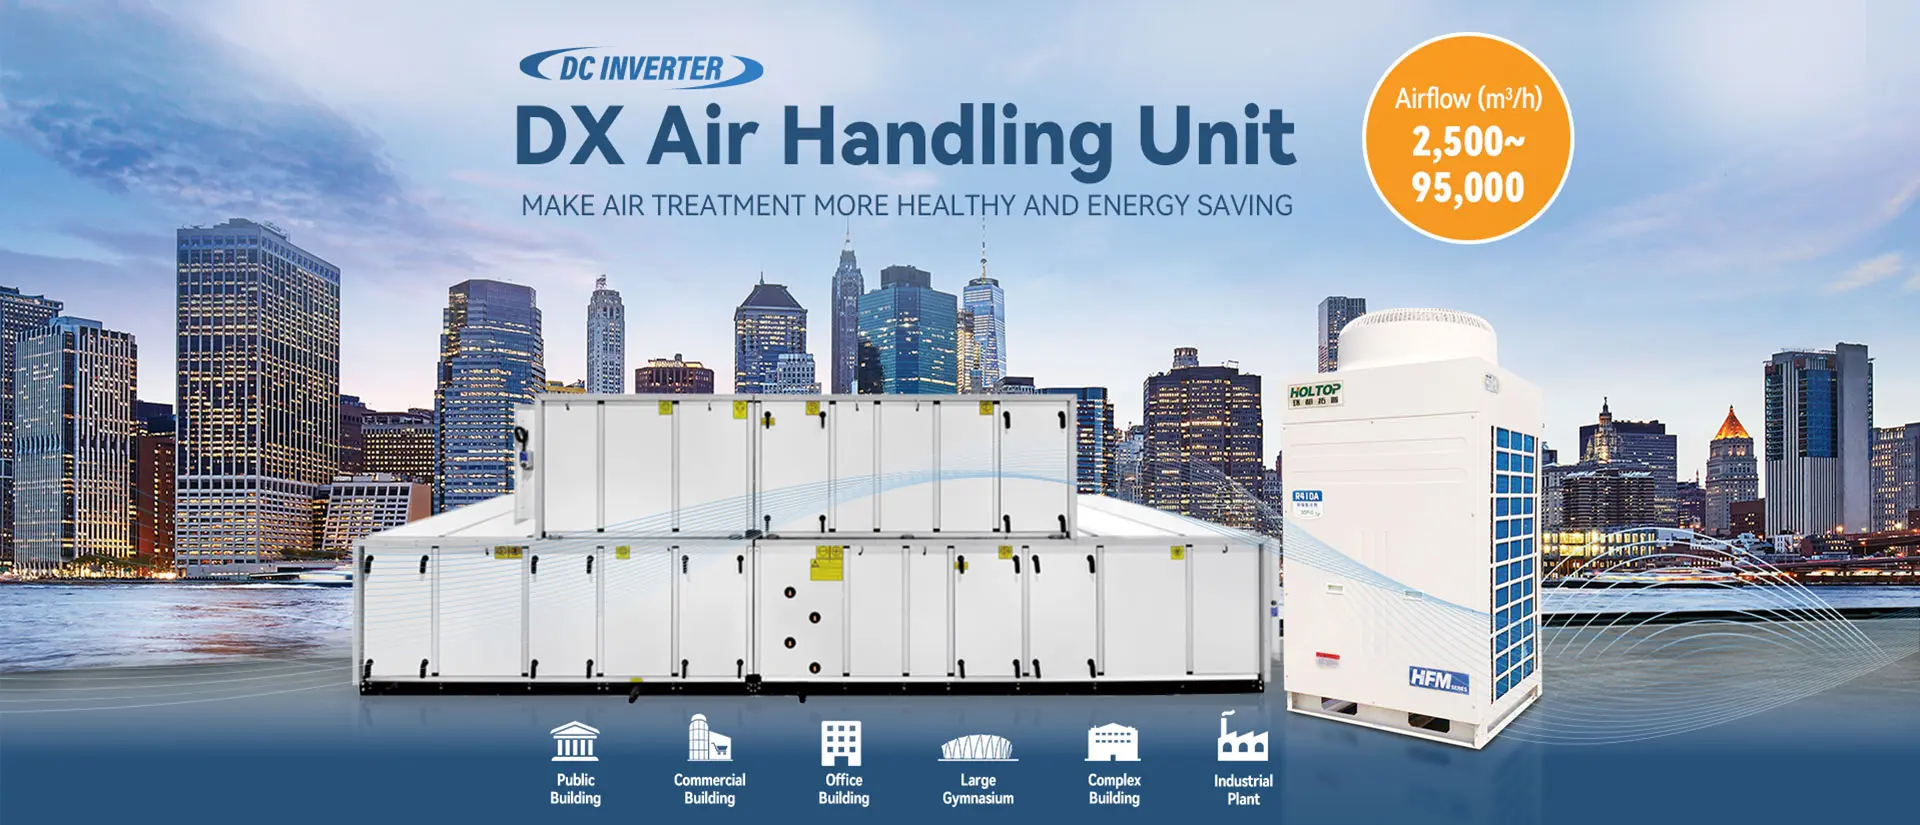 Holtop_DX_Coil_Air_Handling_units_DX_AHU